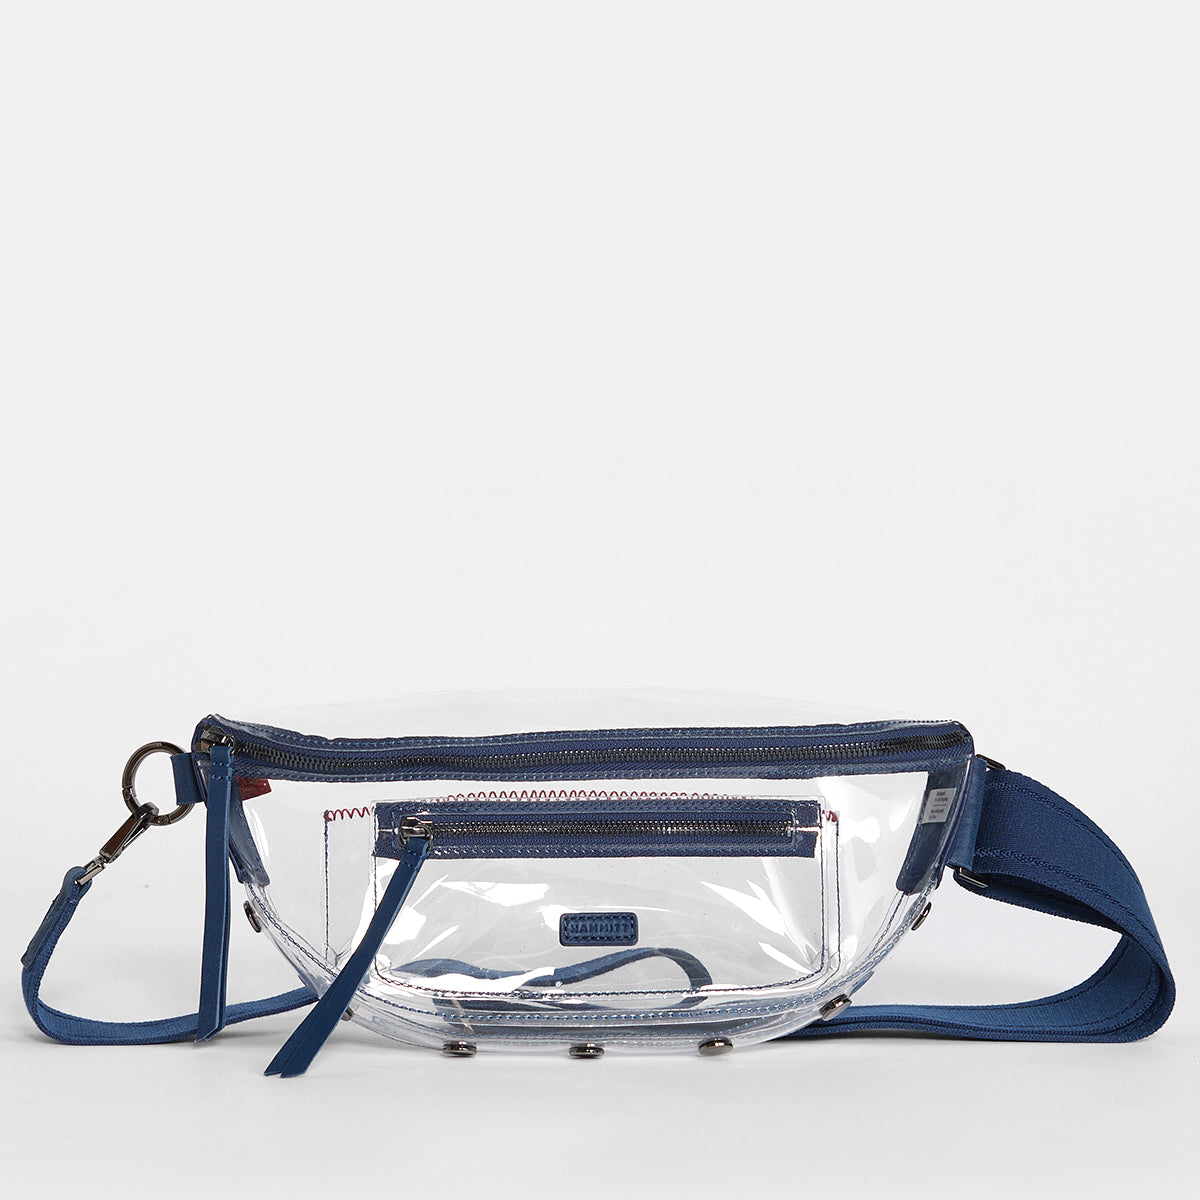 Charles-Crossbody-Clear-Vintage-Navy-Front-View